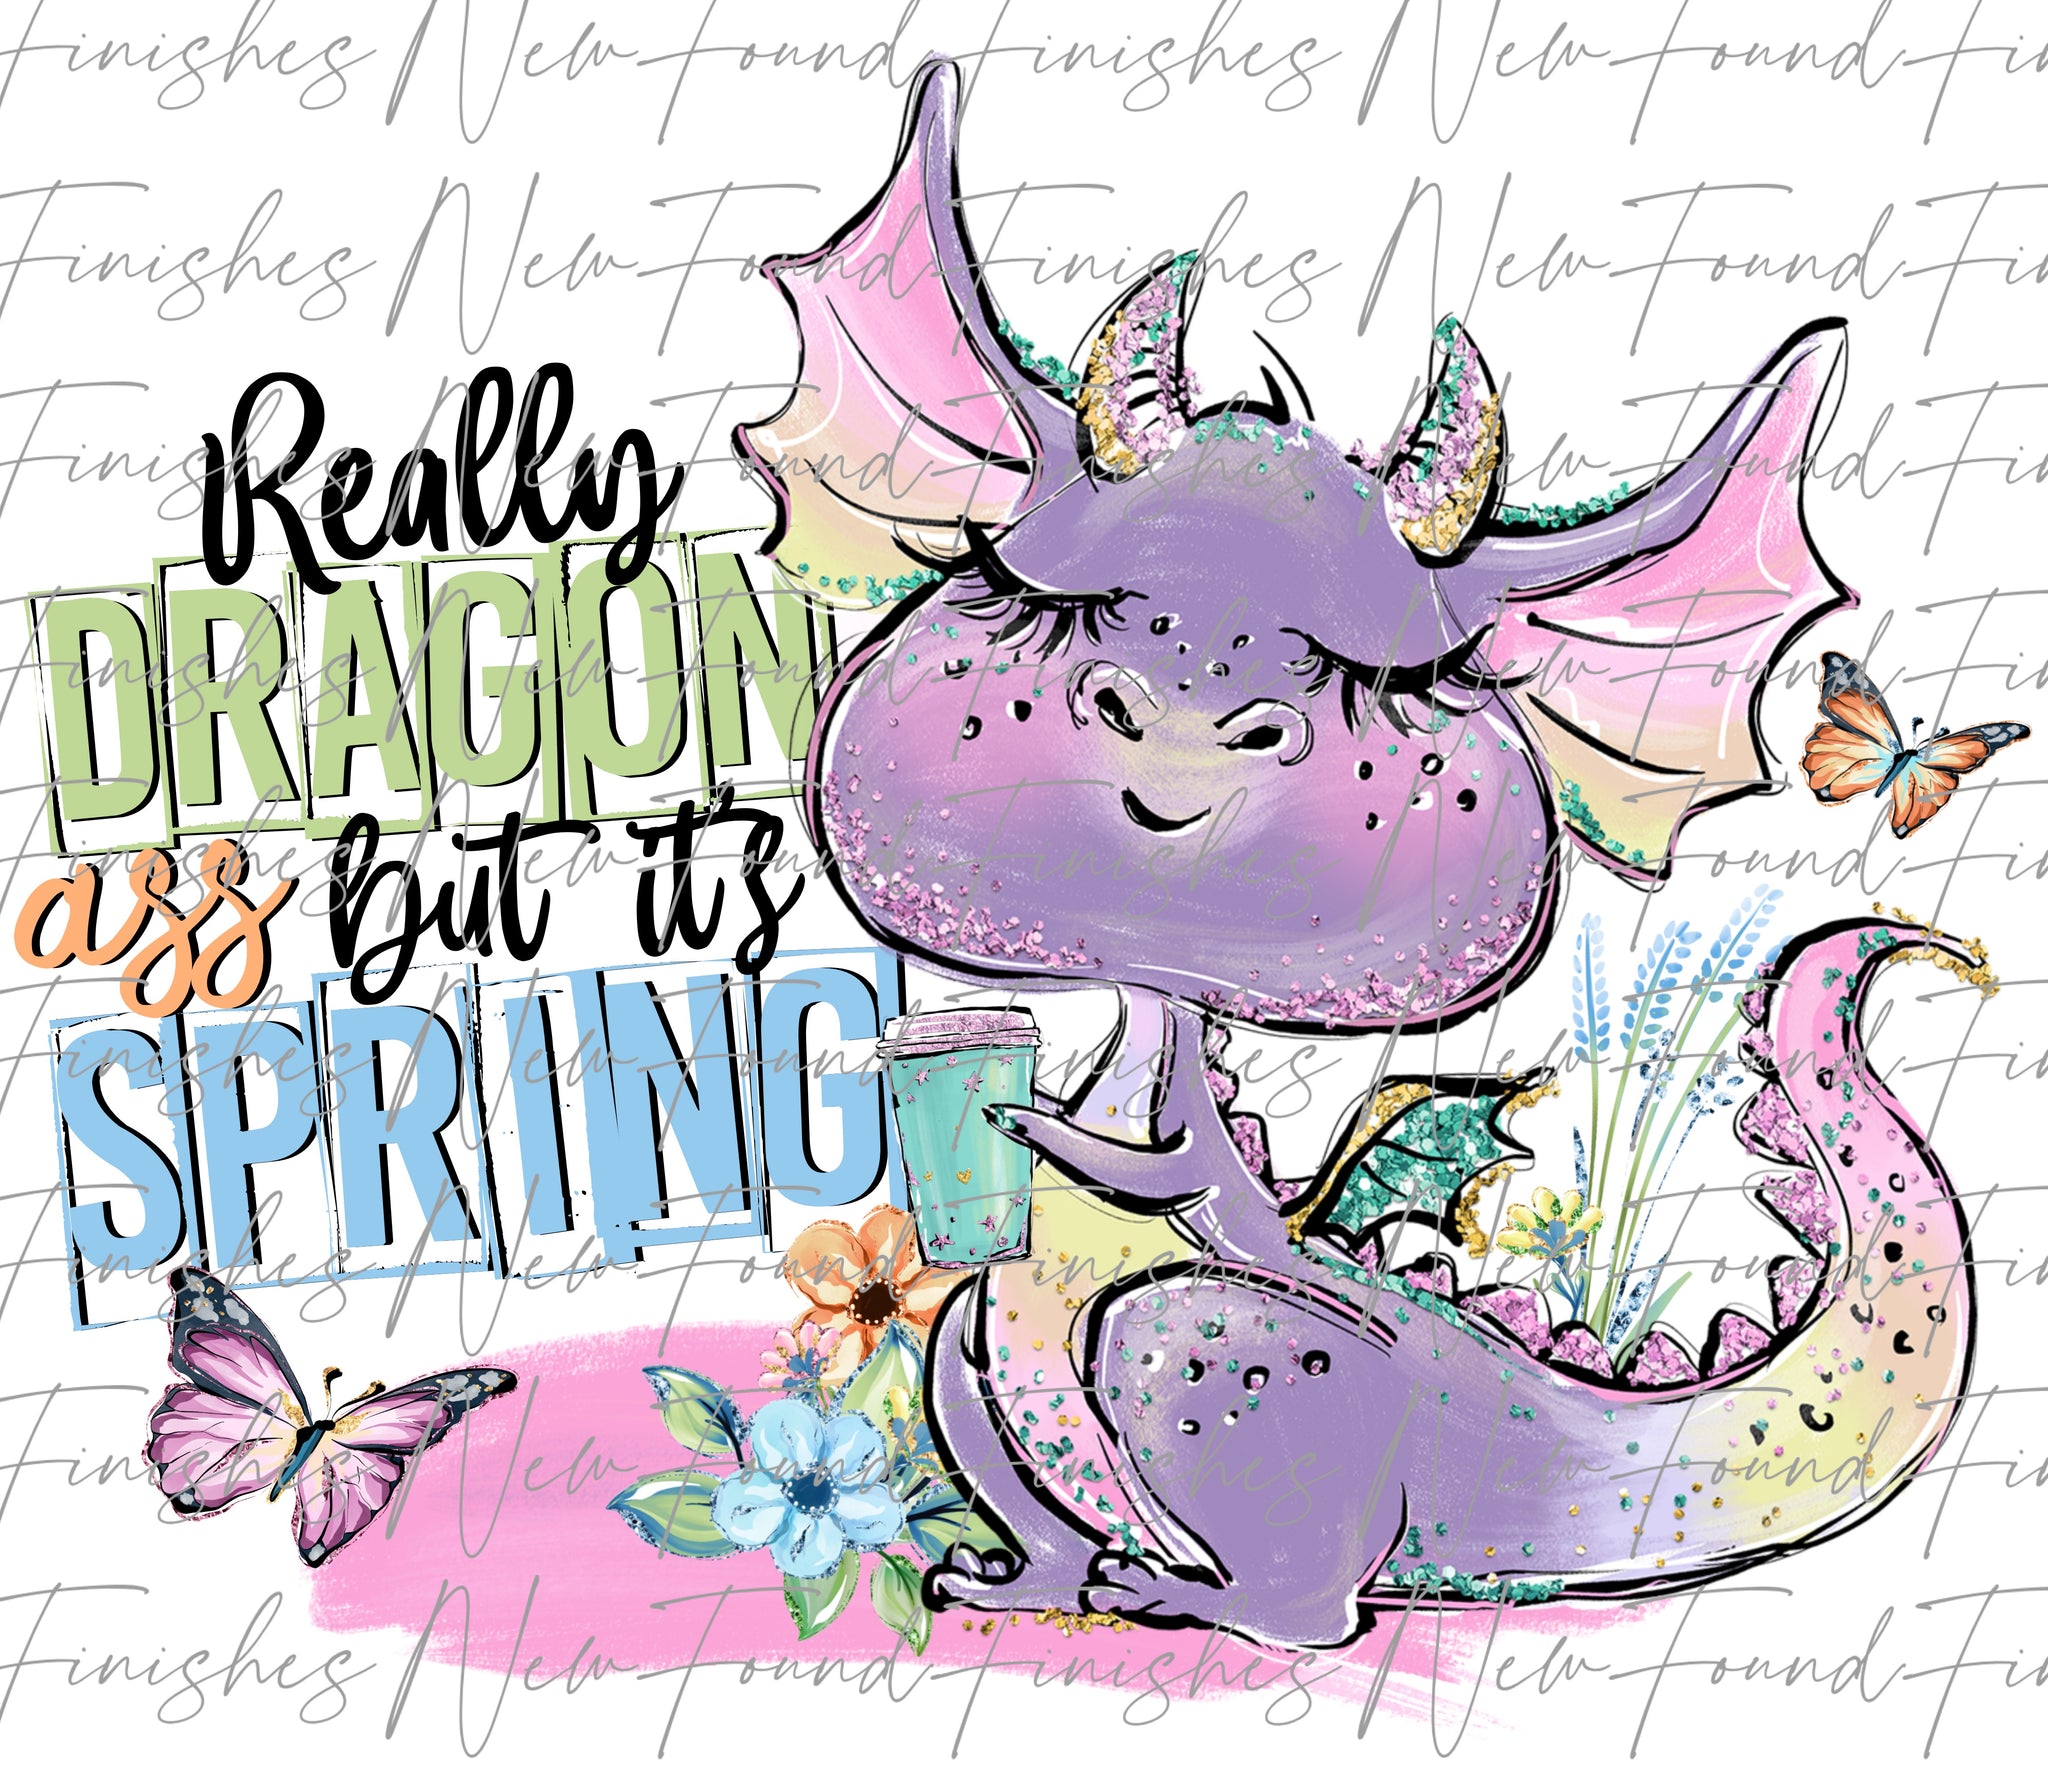 Really dragon but spring